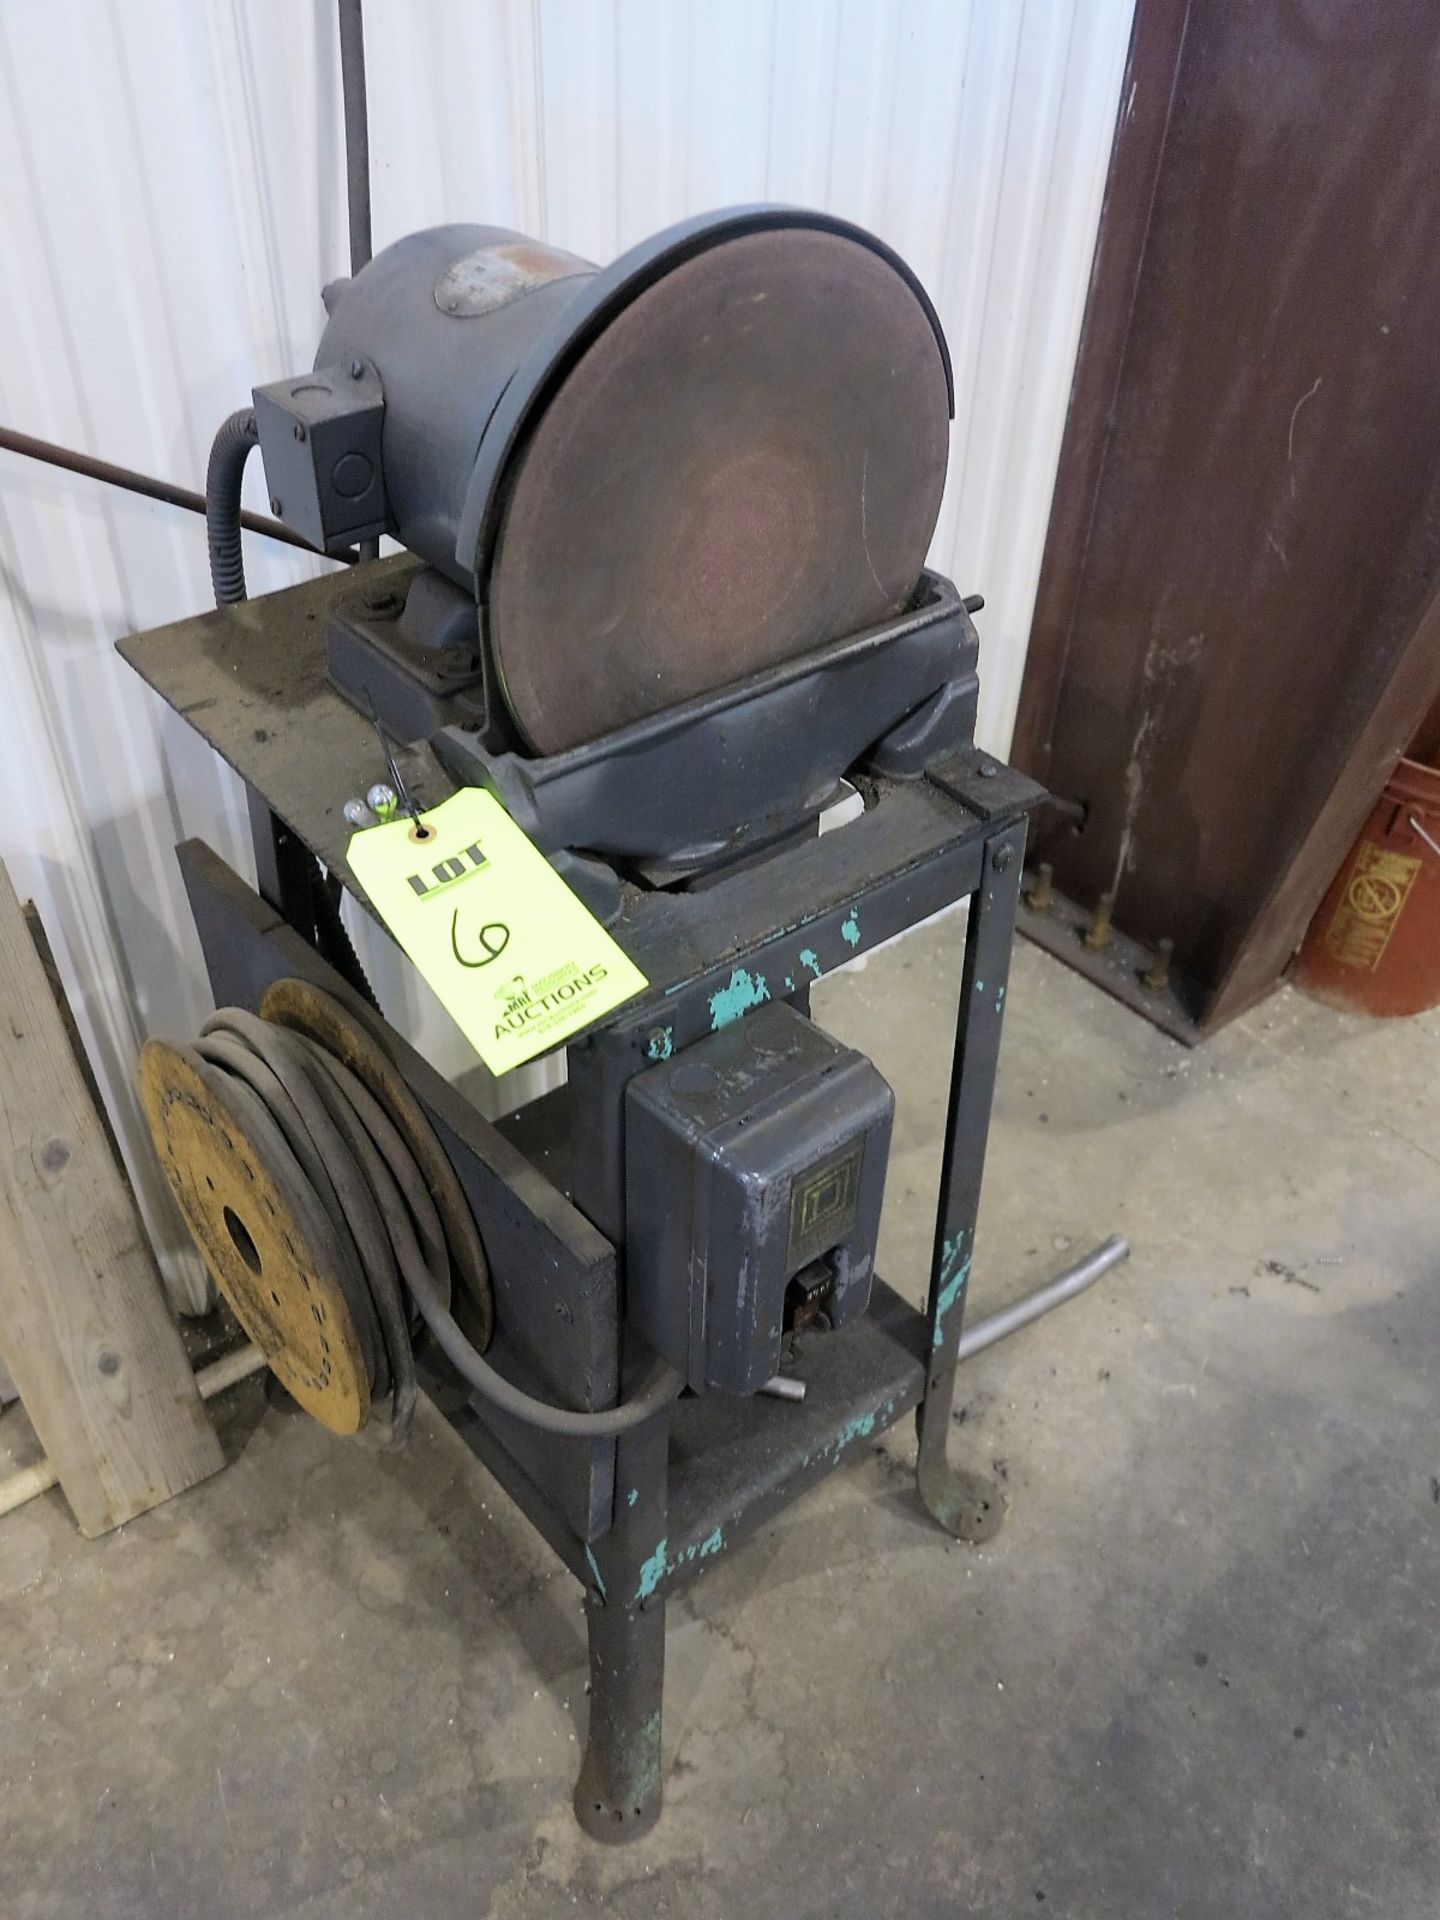 ROCKWELL 12" DISC SANDER W/ METAL STAND